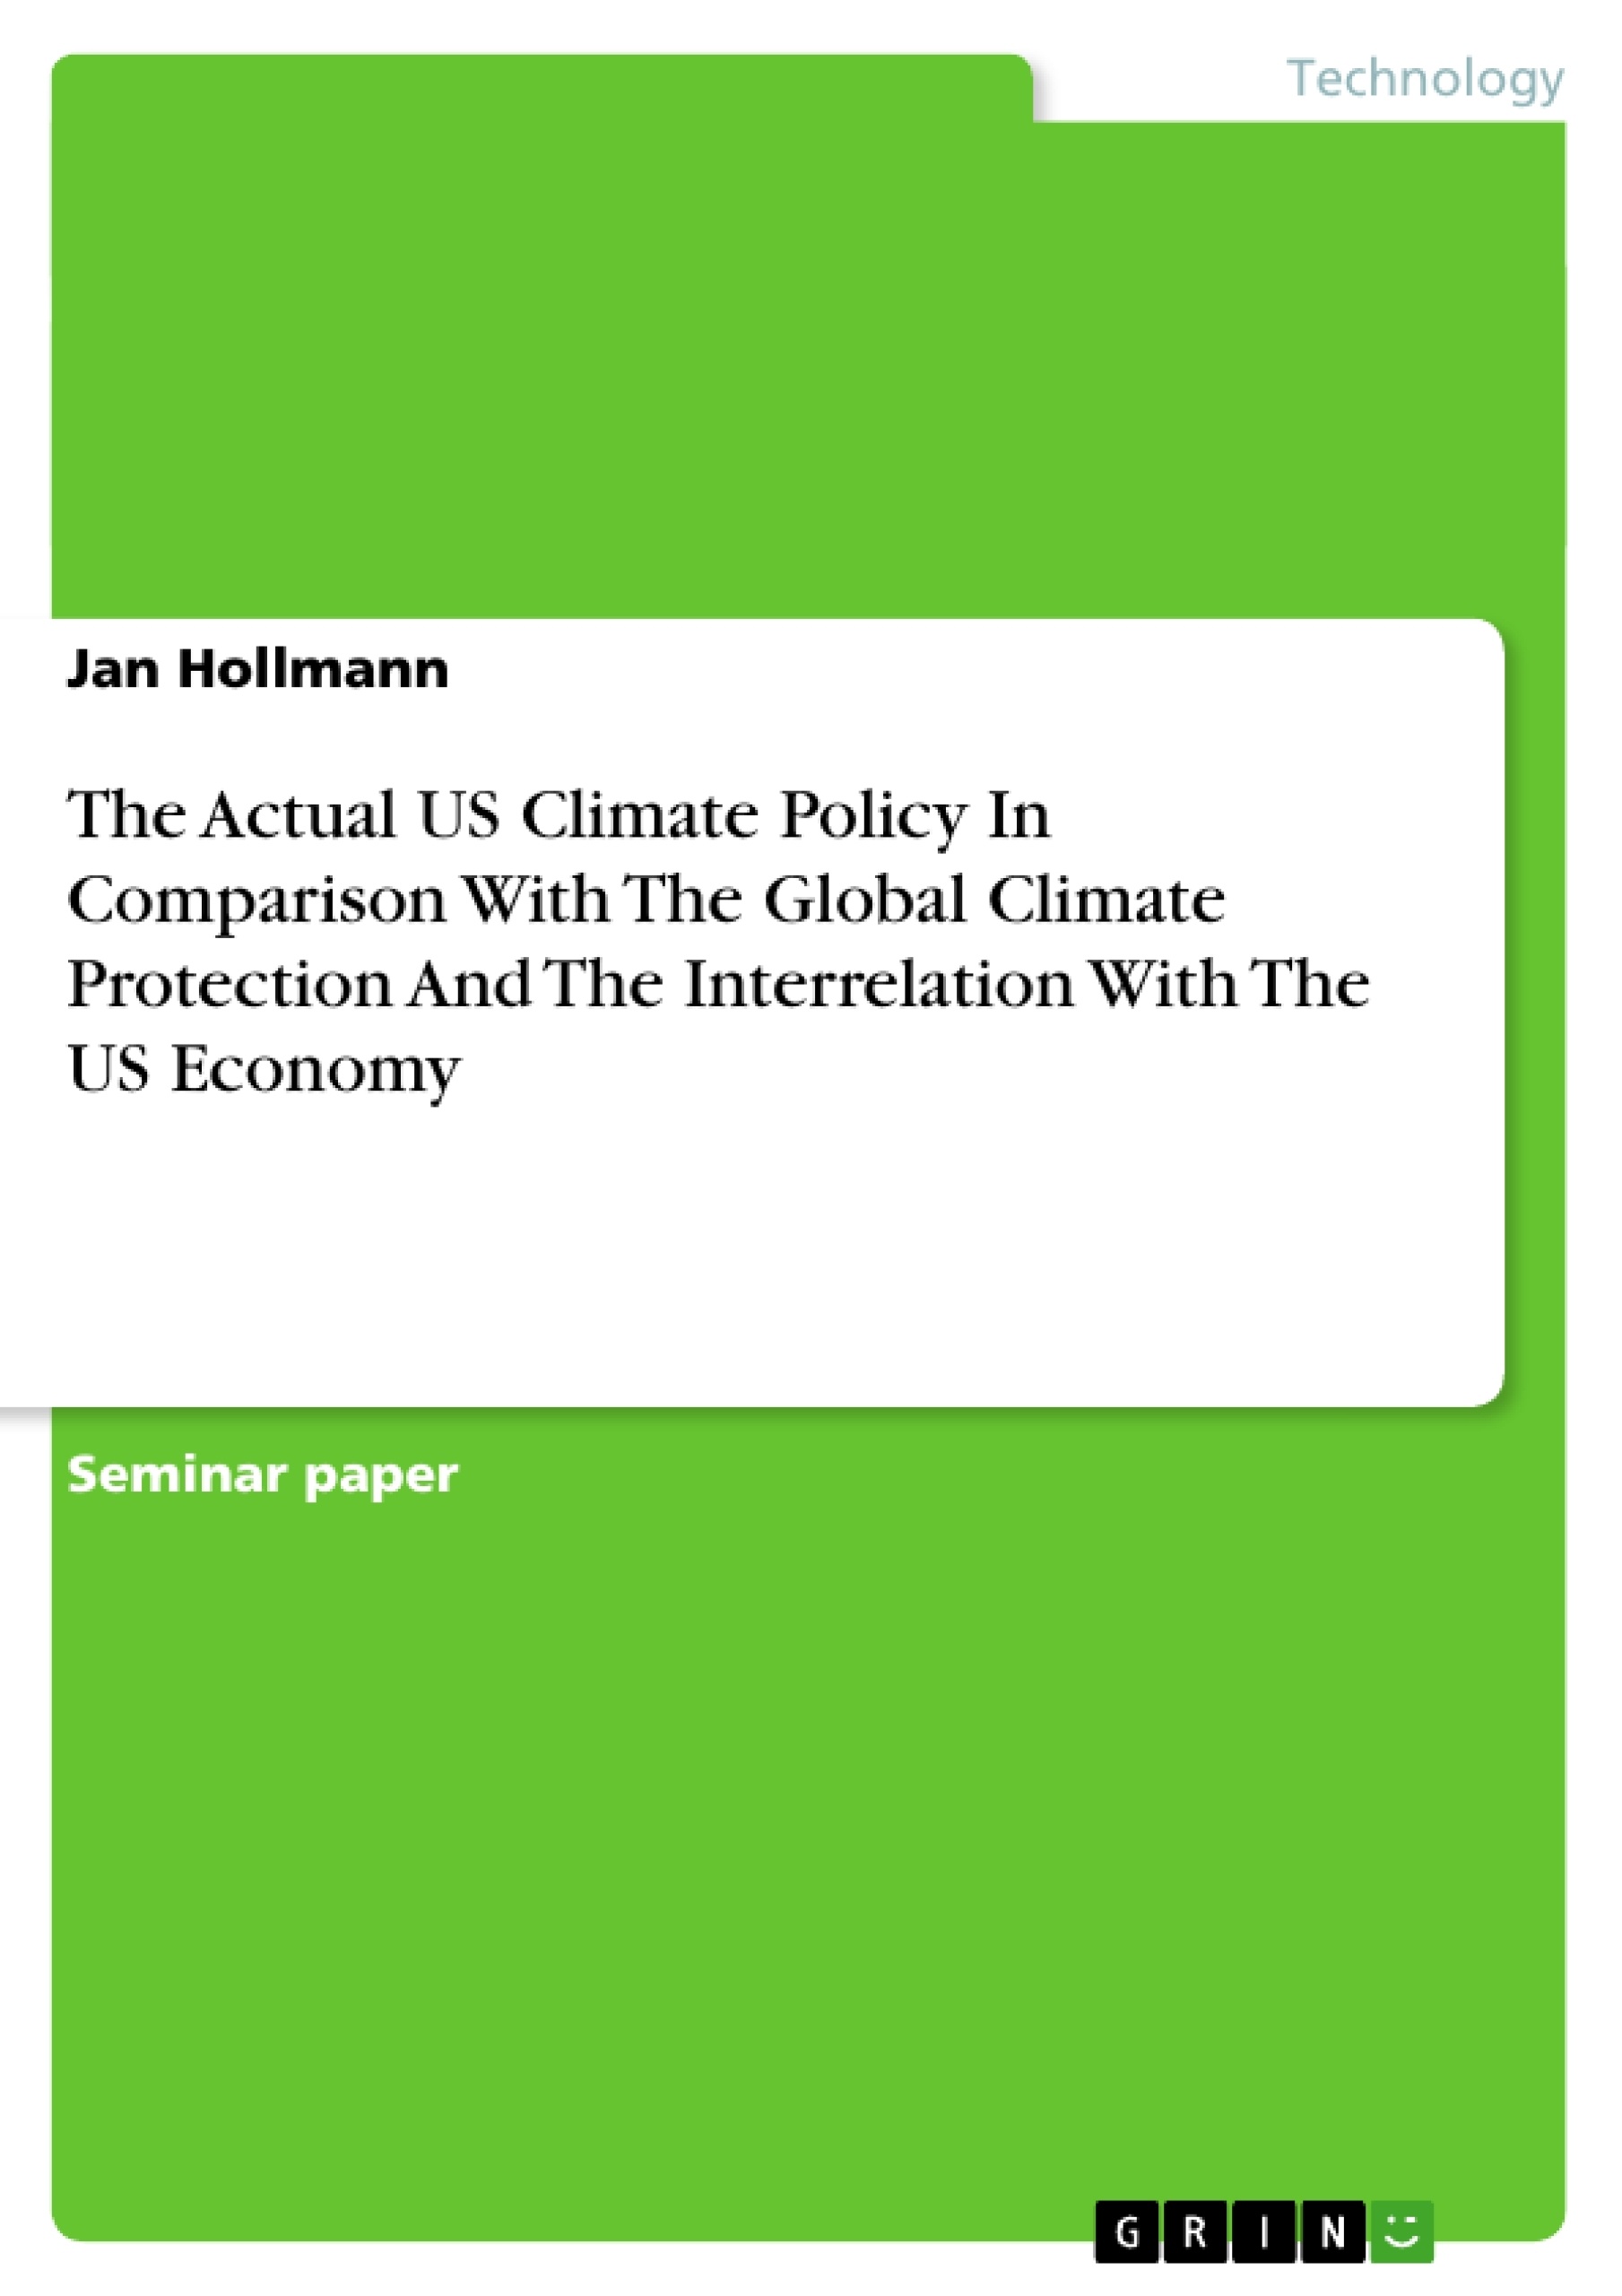 Title: The Actual US Climate Policy In Comparison With The Global Climate Protection And The Interrelation With The US Economy